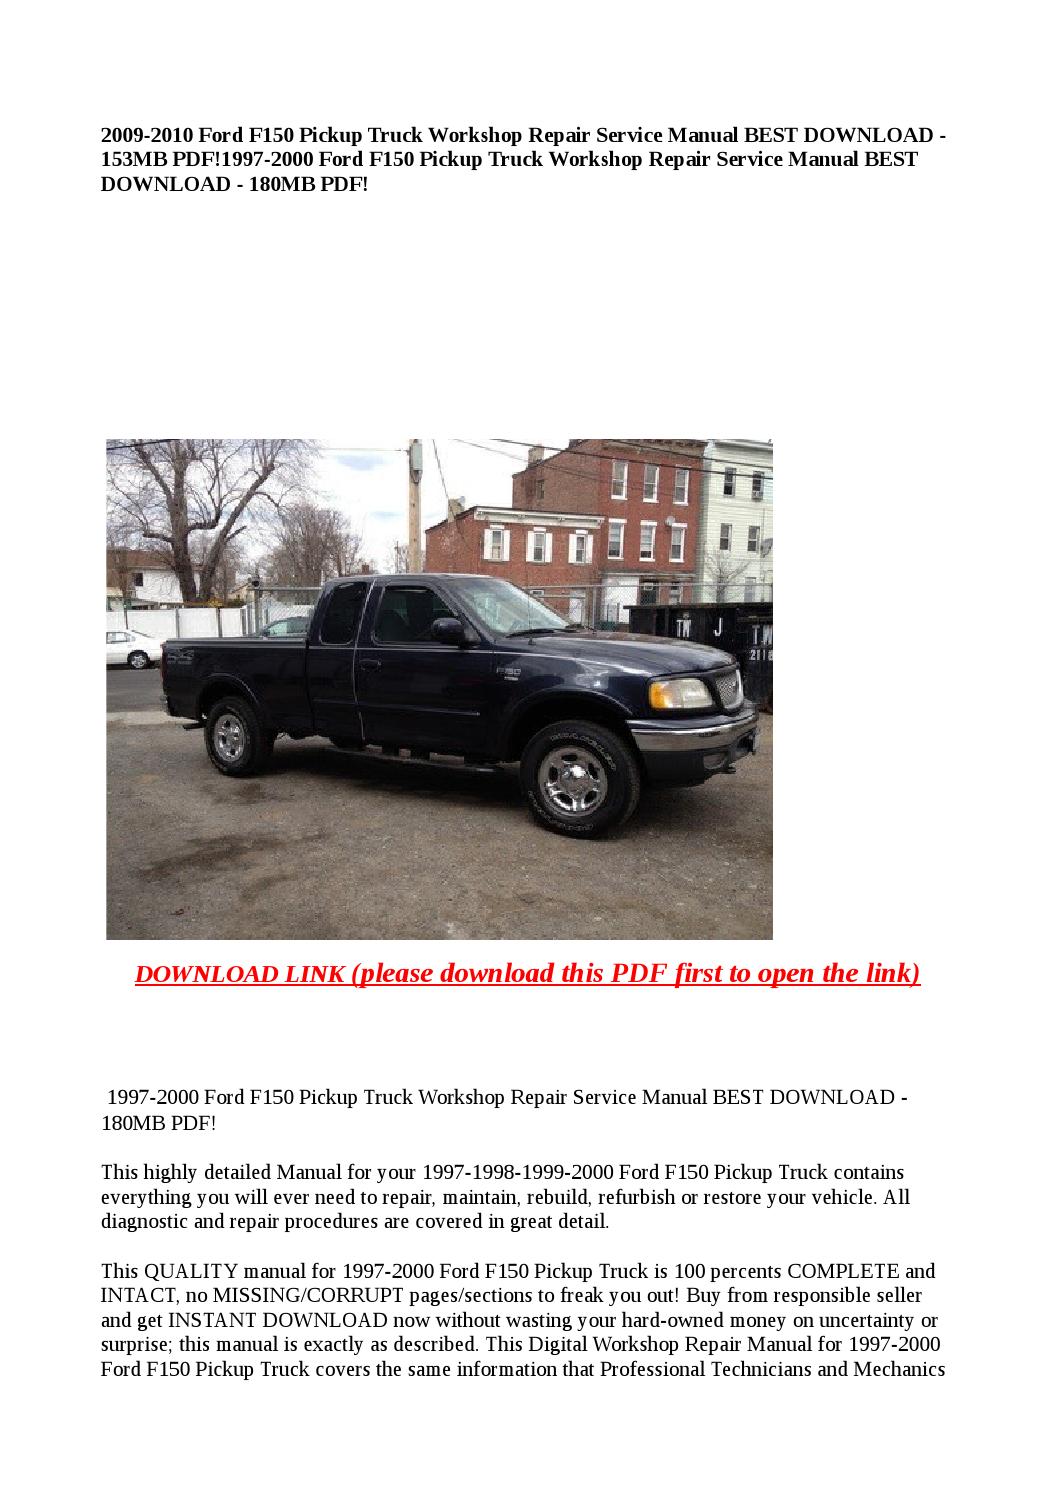 Ford truck service manual online